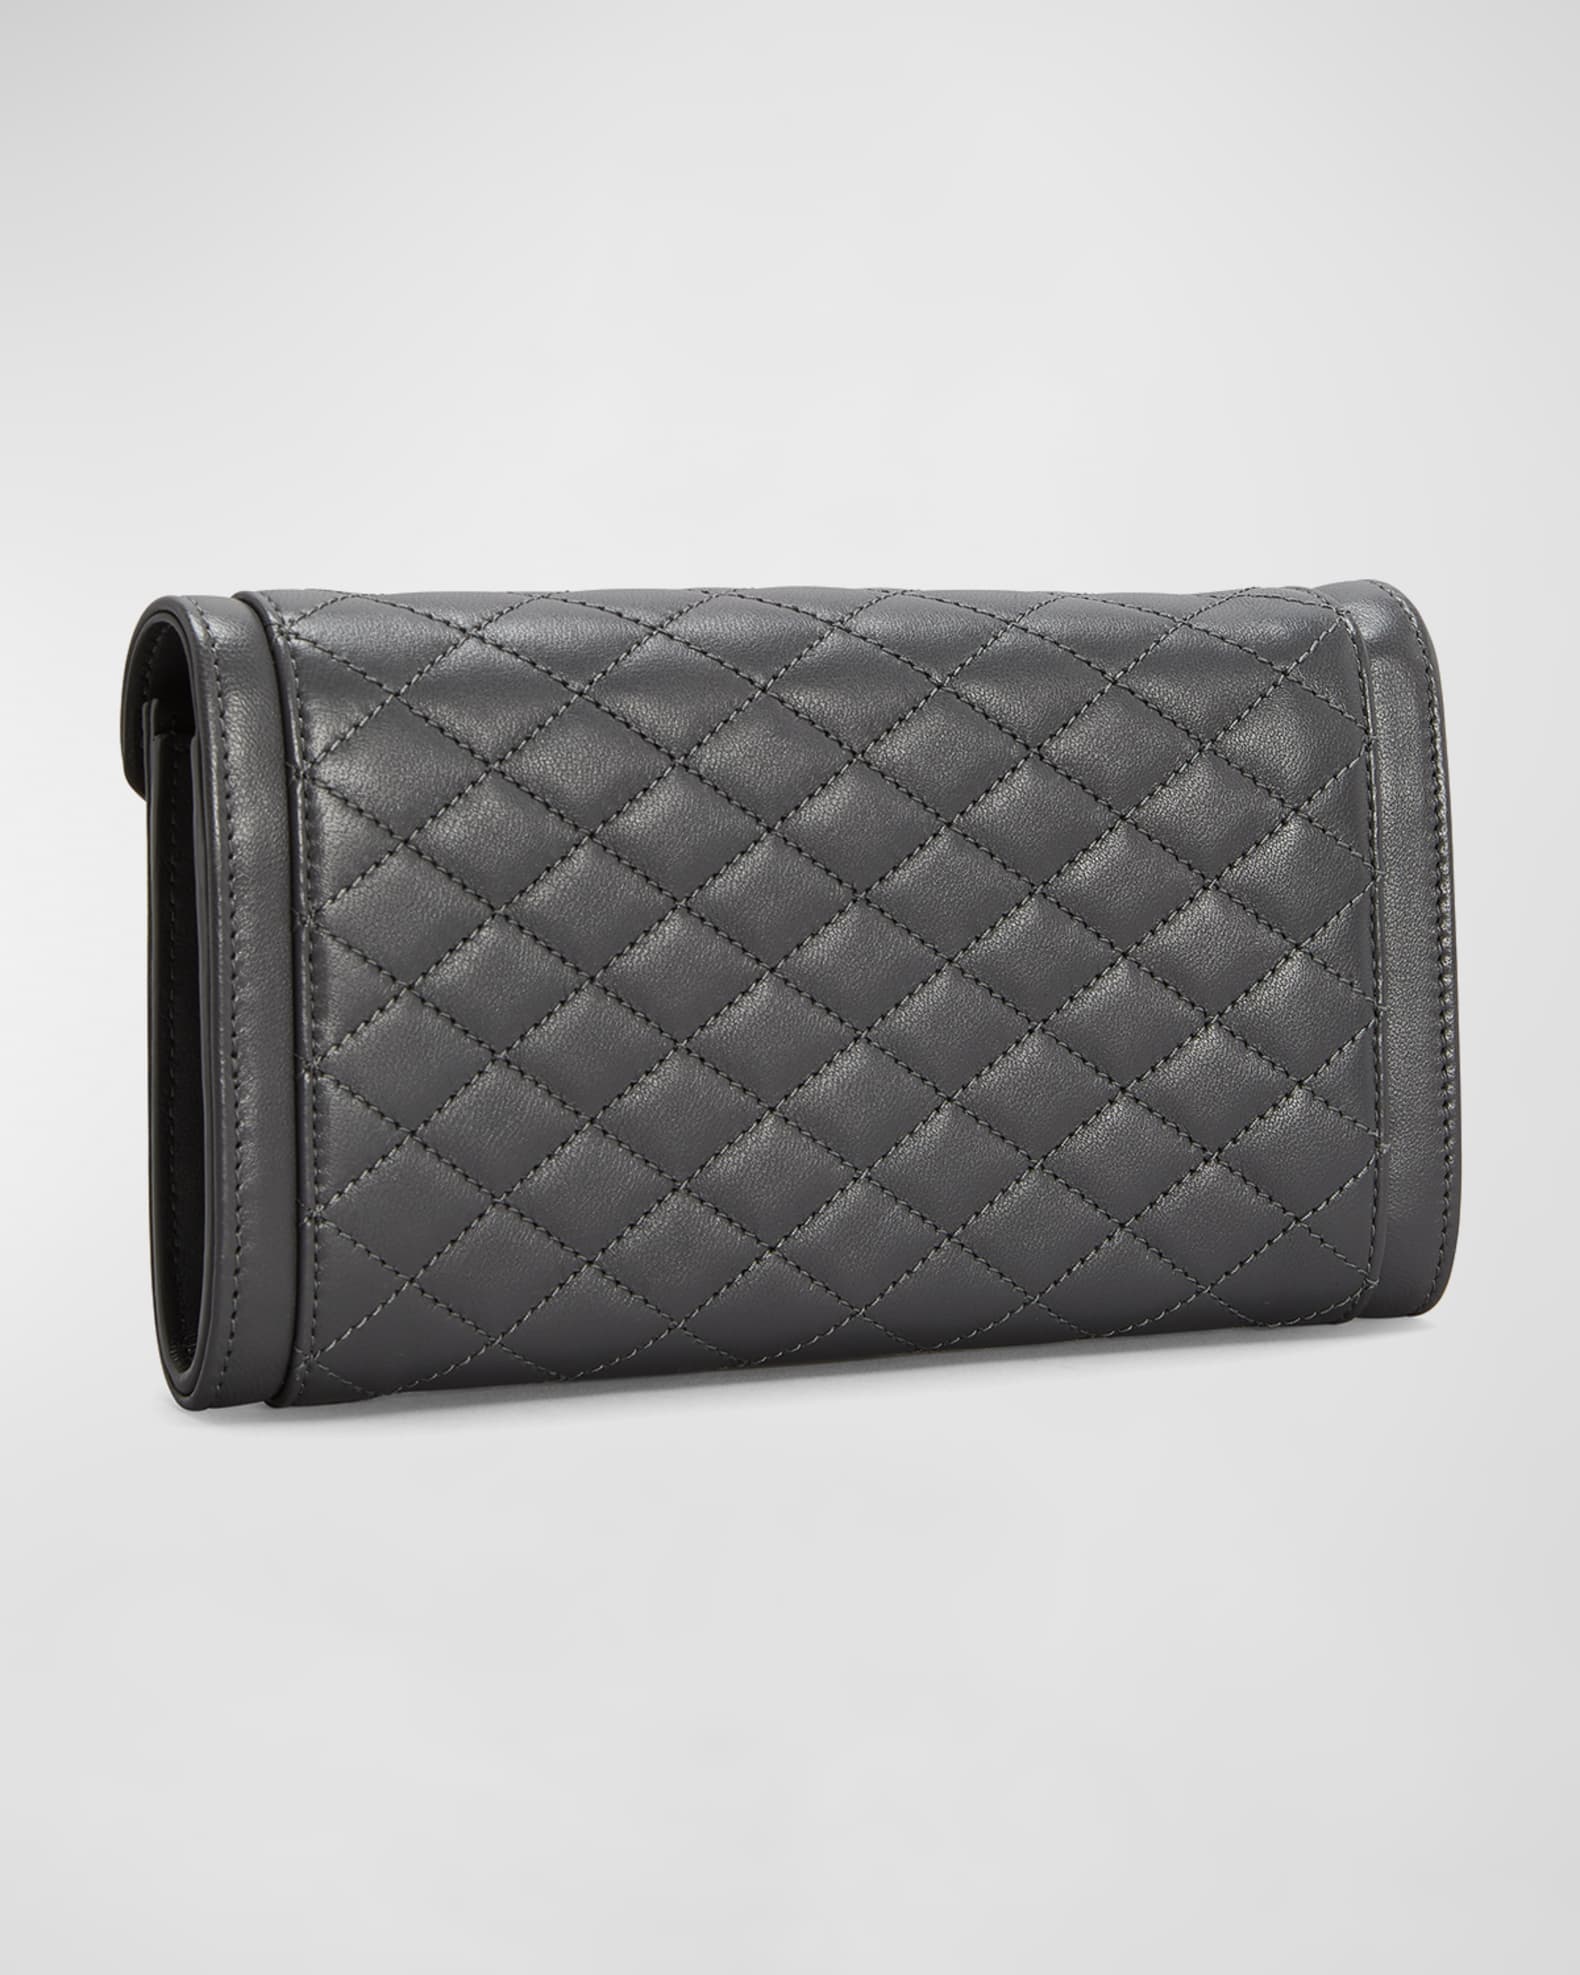 Chanel White/Black Quilted Lambskin Leather Chain and Charm Vanity Case Bag  - Yoogi's Closet